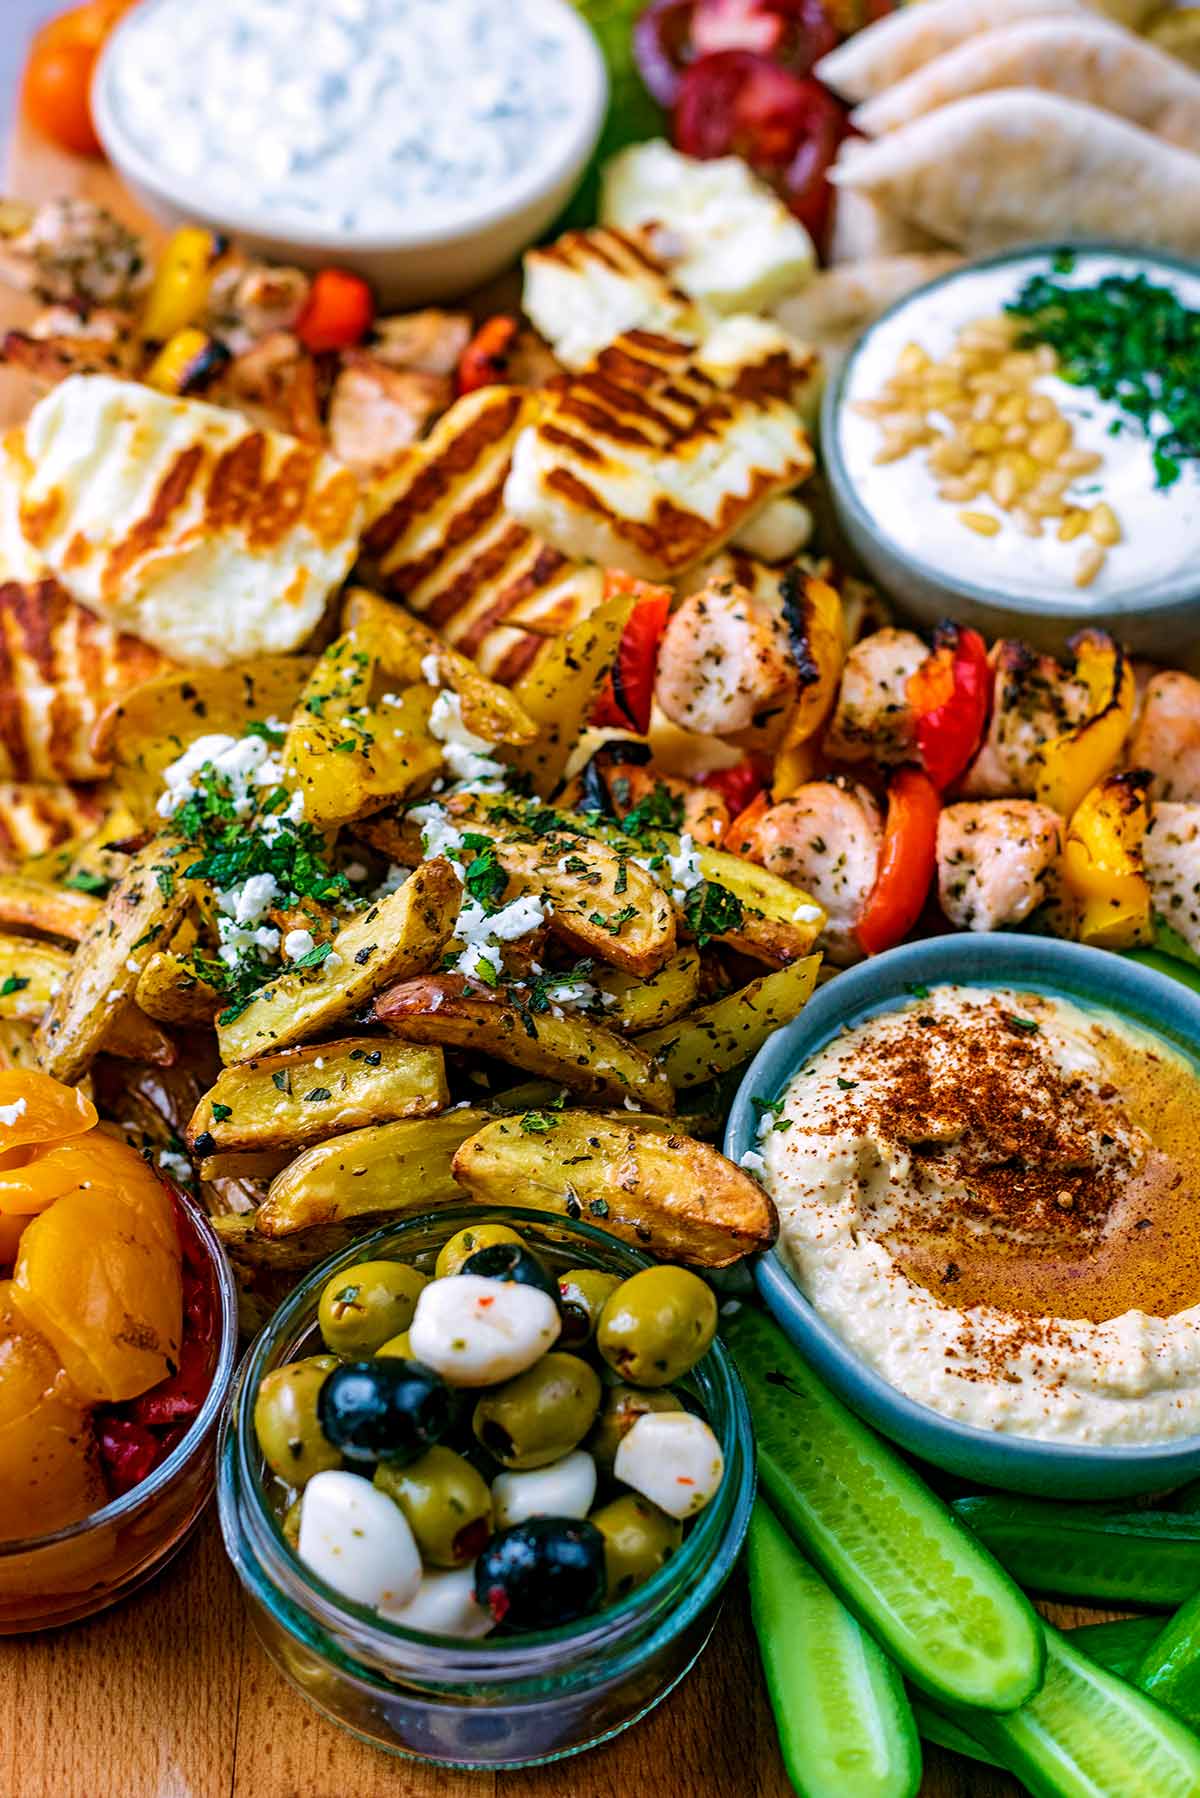 A wooden board covered in dips, vegetables, grilled halloumi slices, olives and chicken skewers.